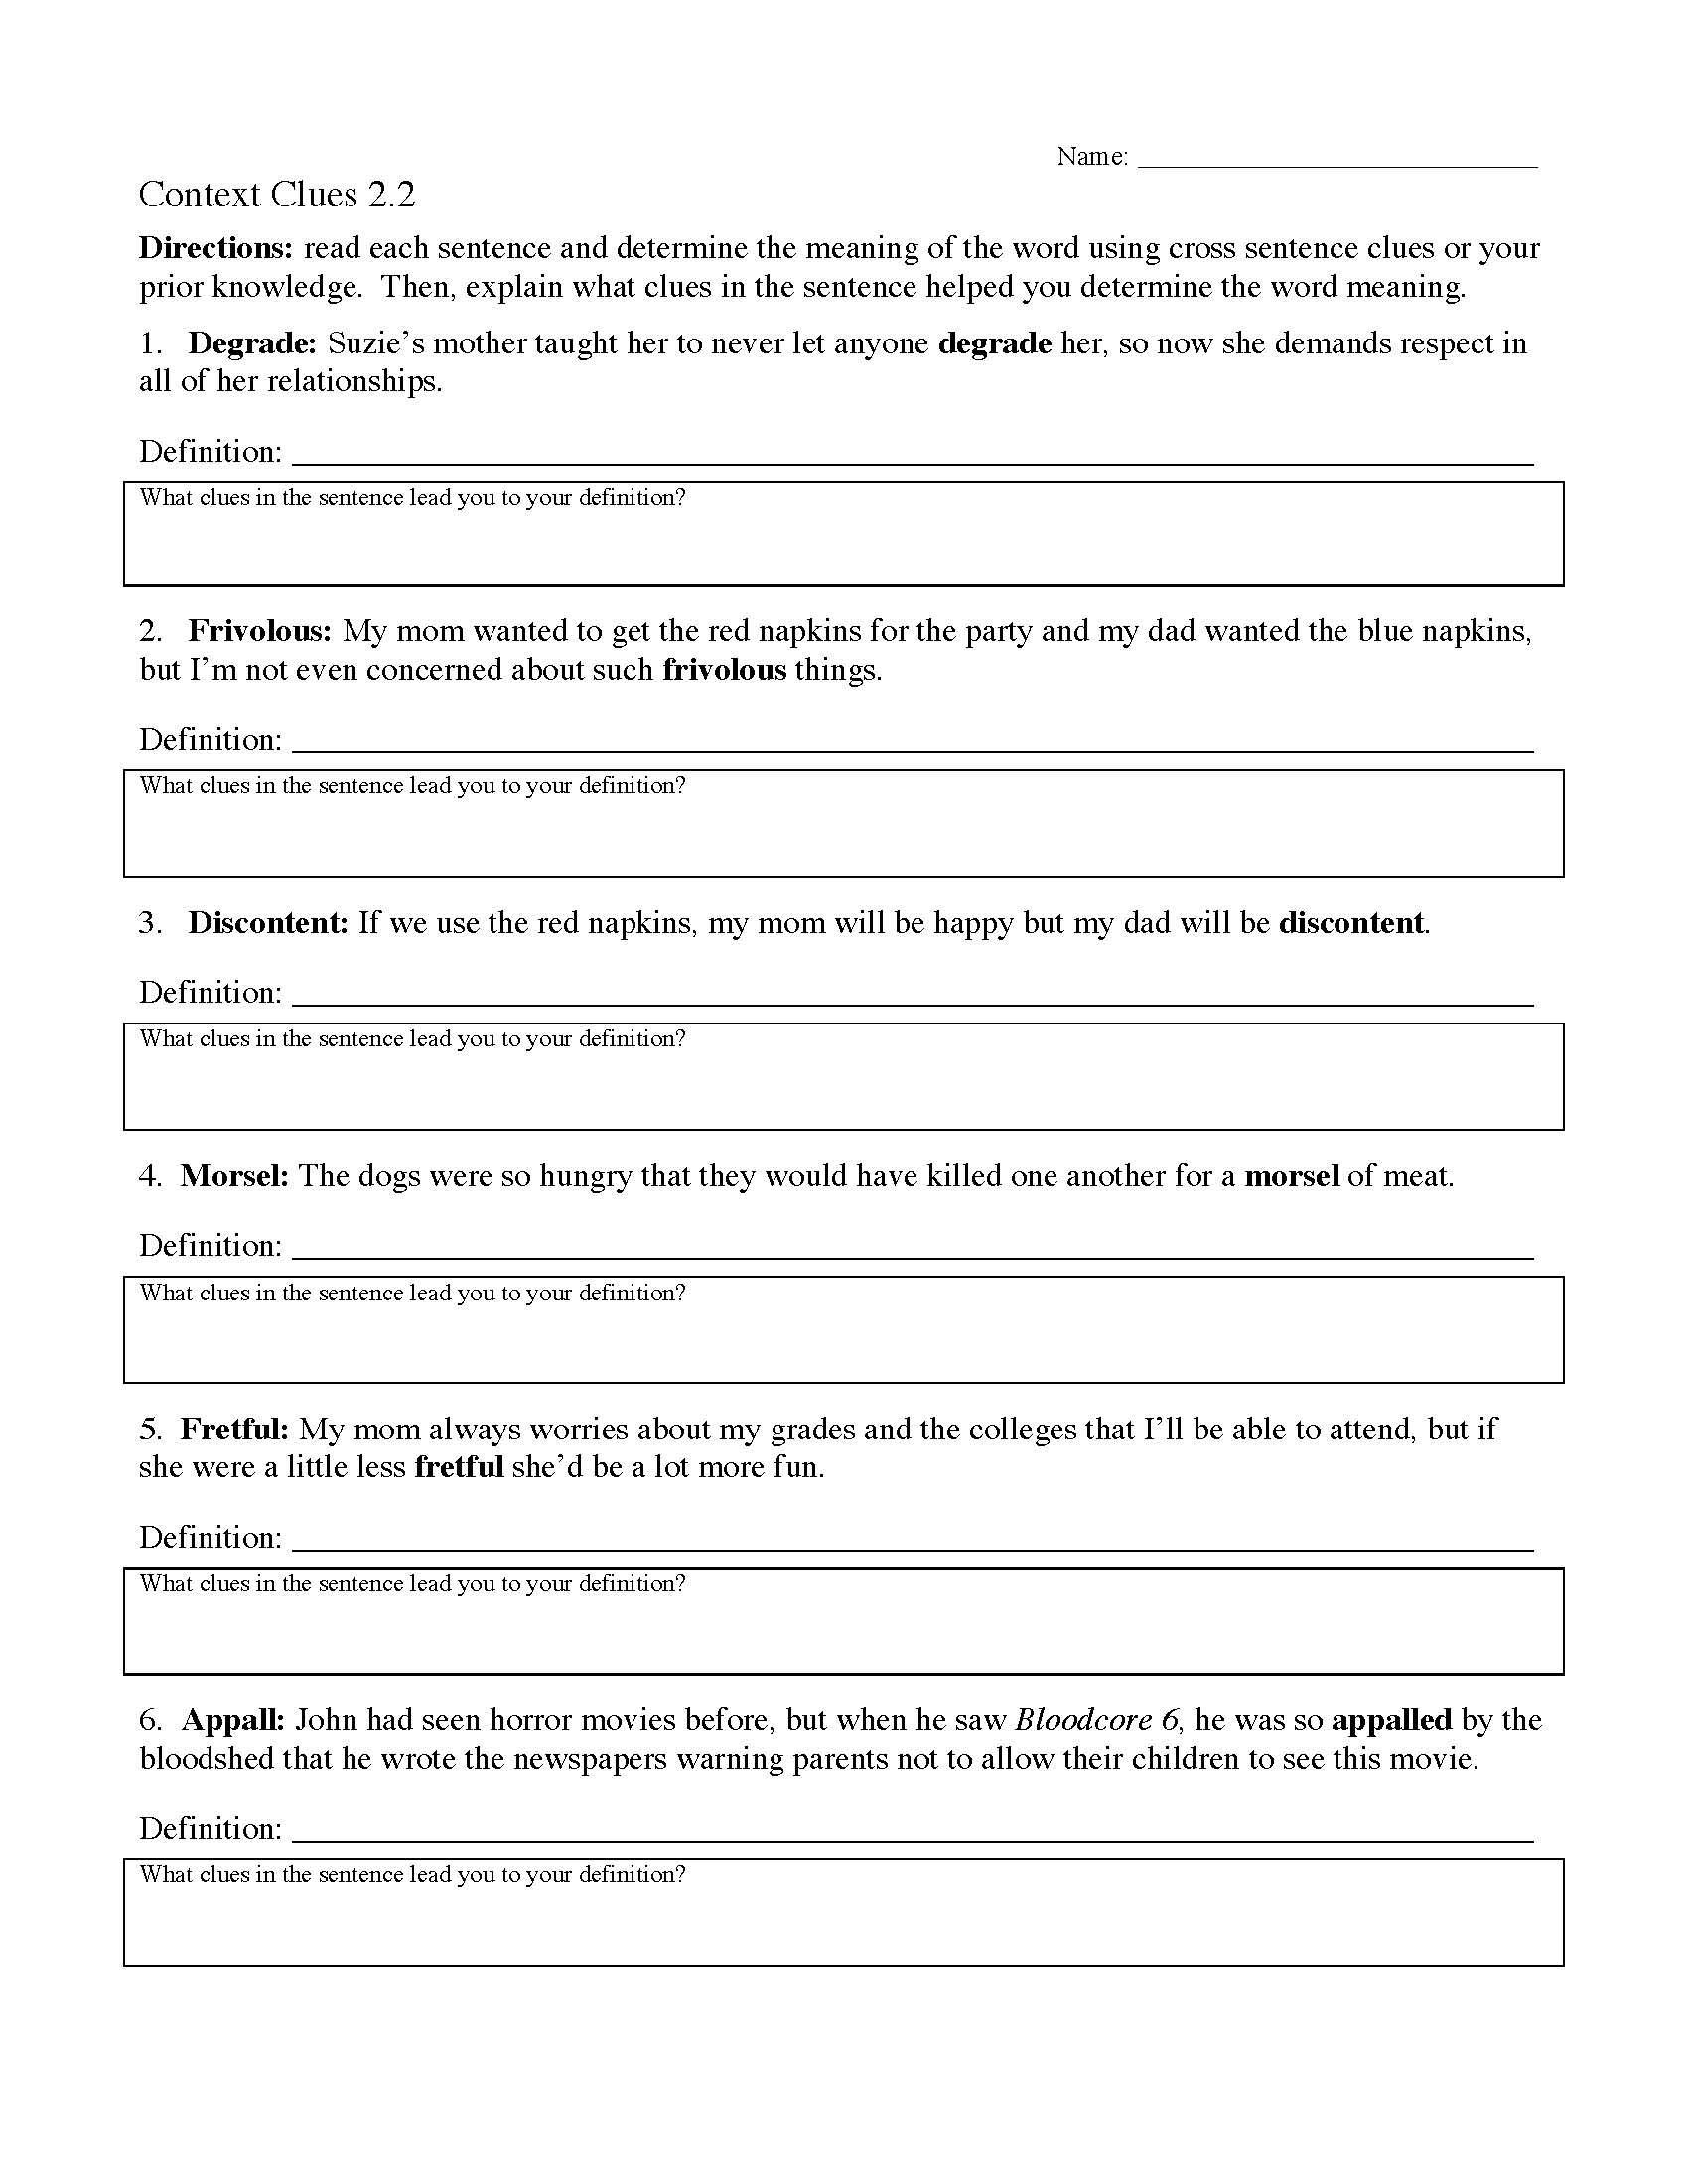 context clues worksheets ereading worksheets